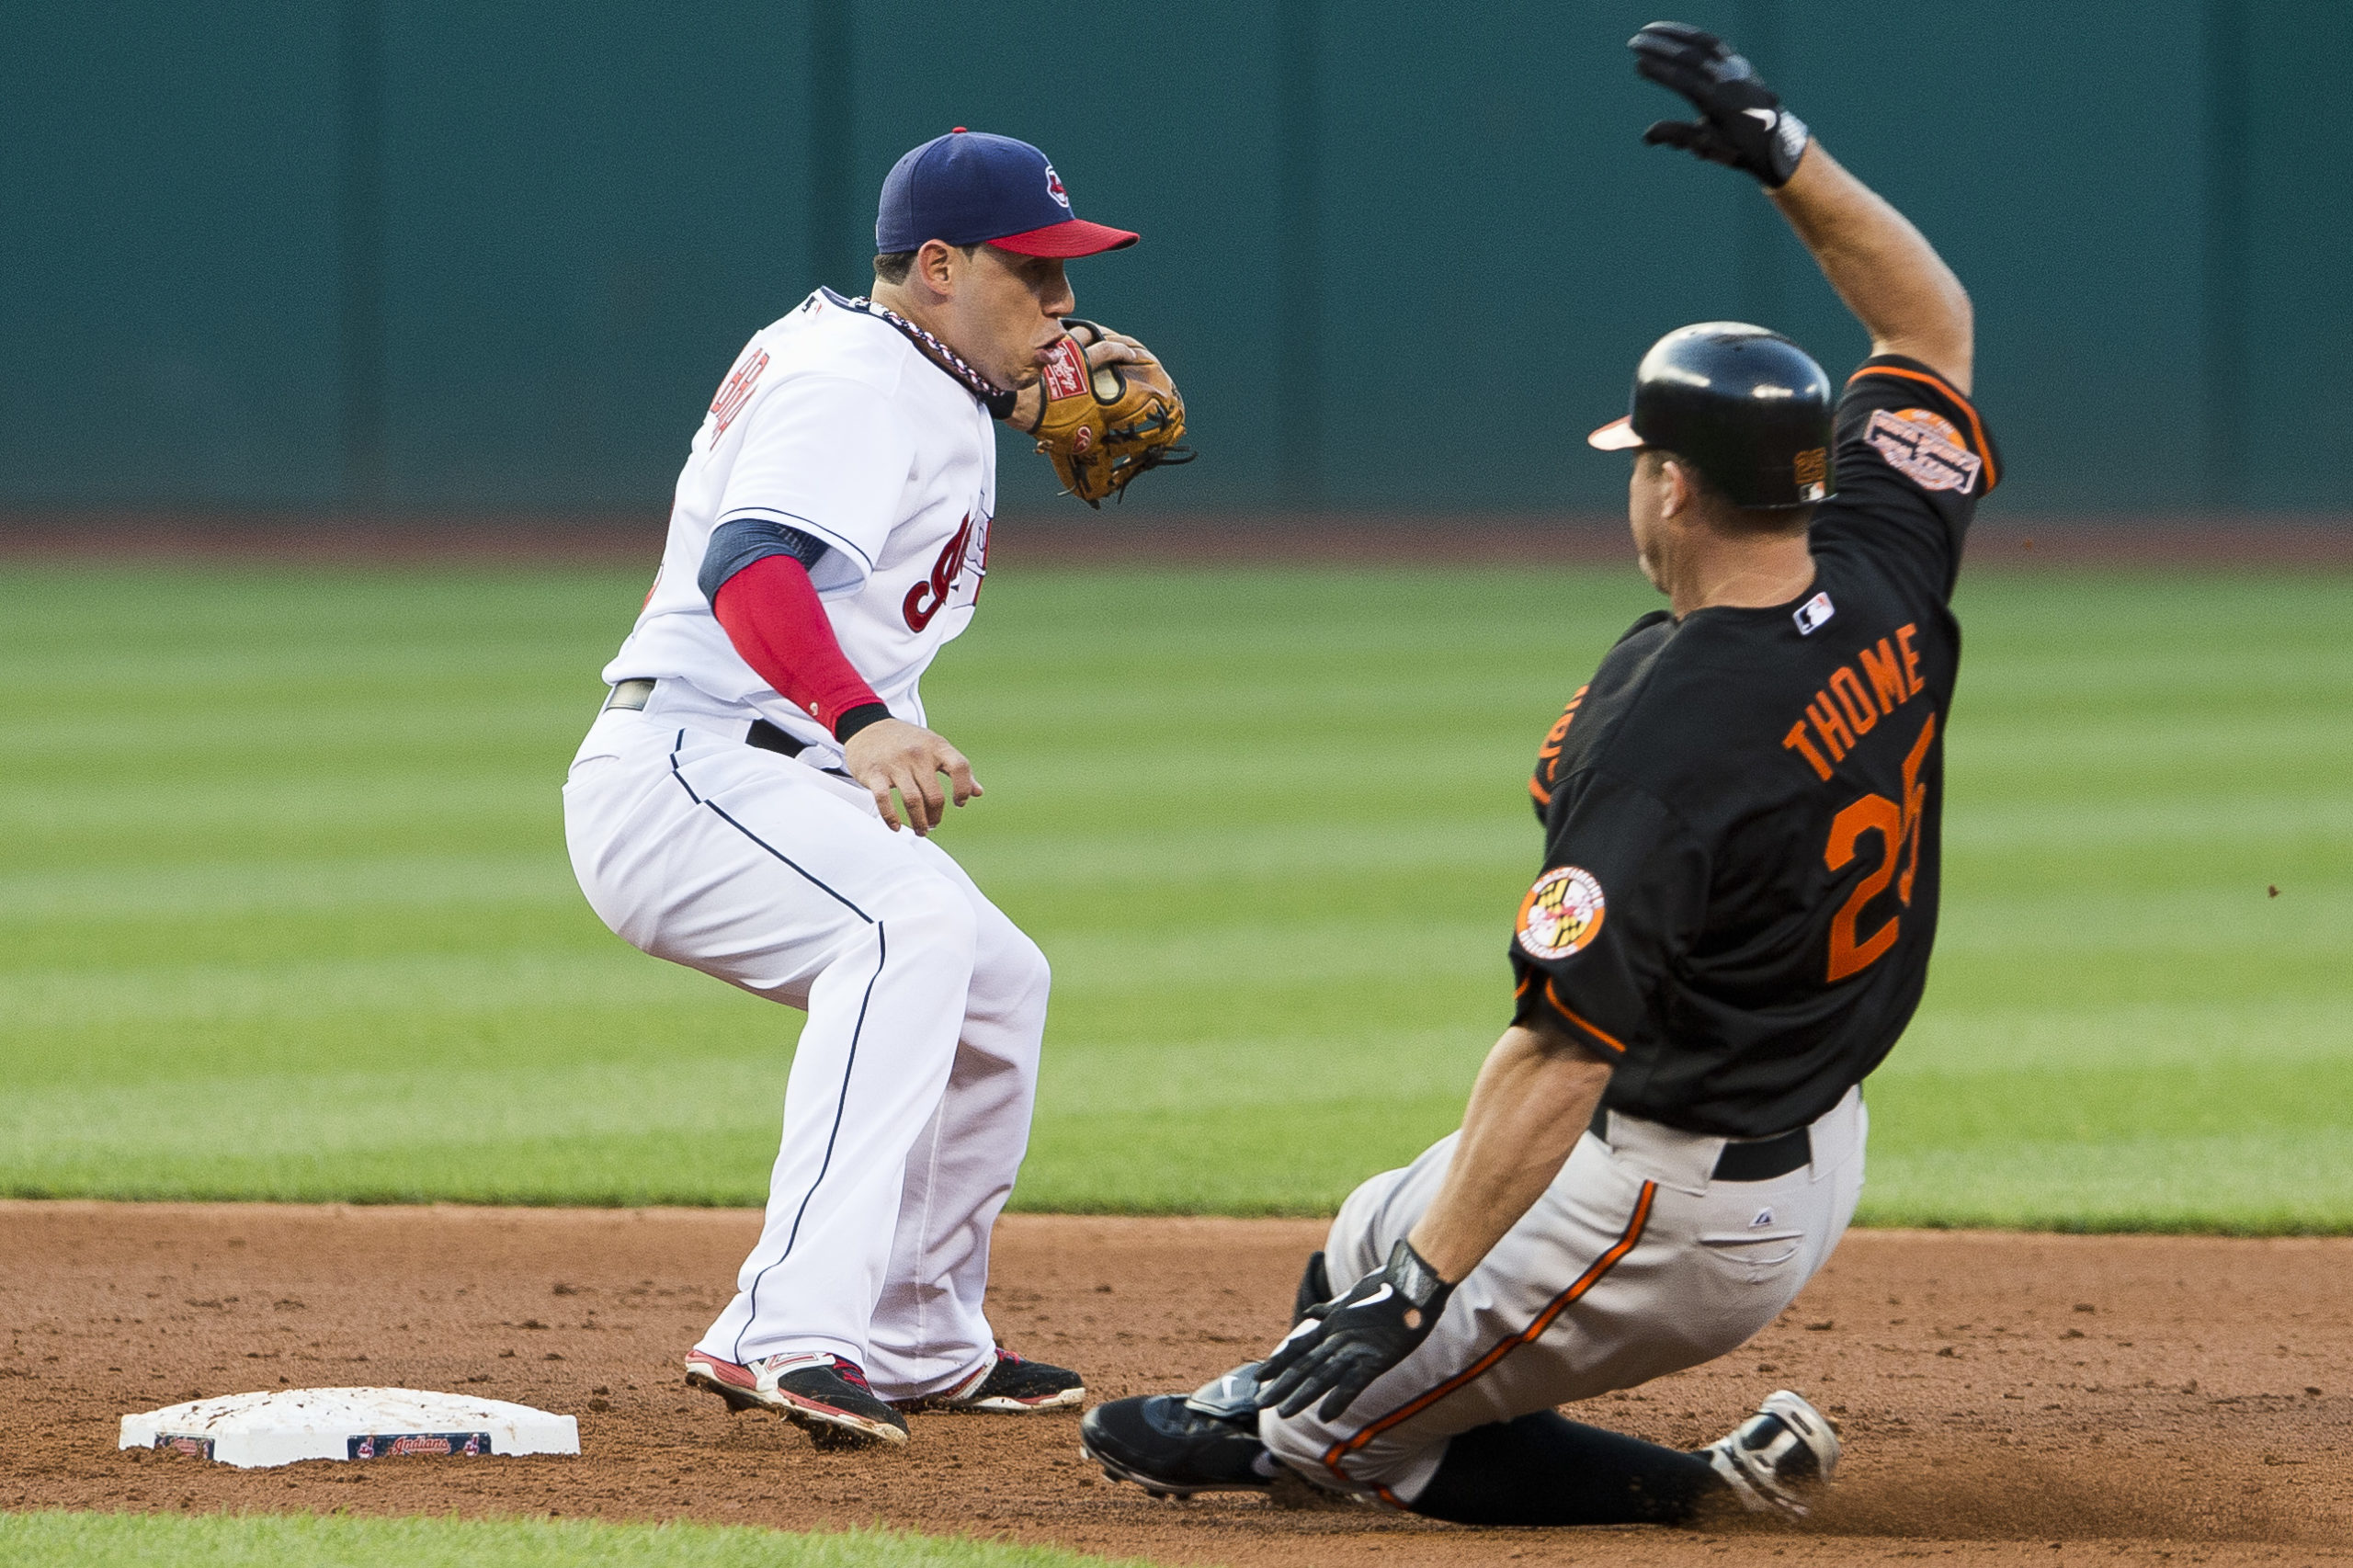 CLEVELAND, OH - JULY 20: Shortstop Asdrubal Cabrera #13 of the Cleveland Indians catches the throw as Jim Thome #25 of the Baltimore Orioles slides into second for a double during the third inning at Progressive Field on July 20, 2012 in Cleveland, Ohio. Jason Miller/Getty Images